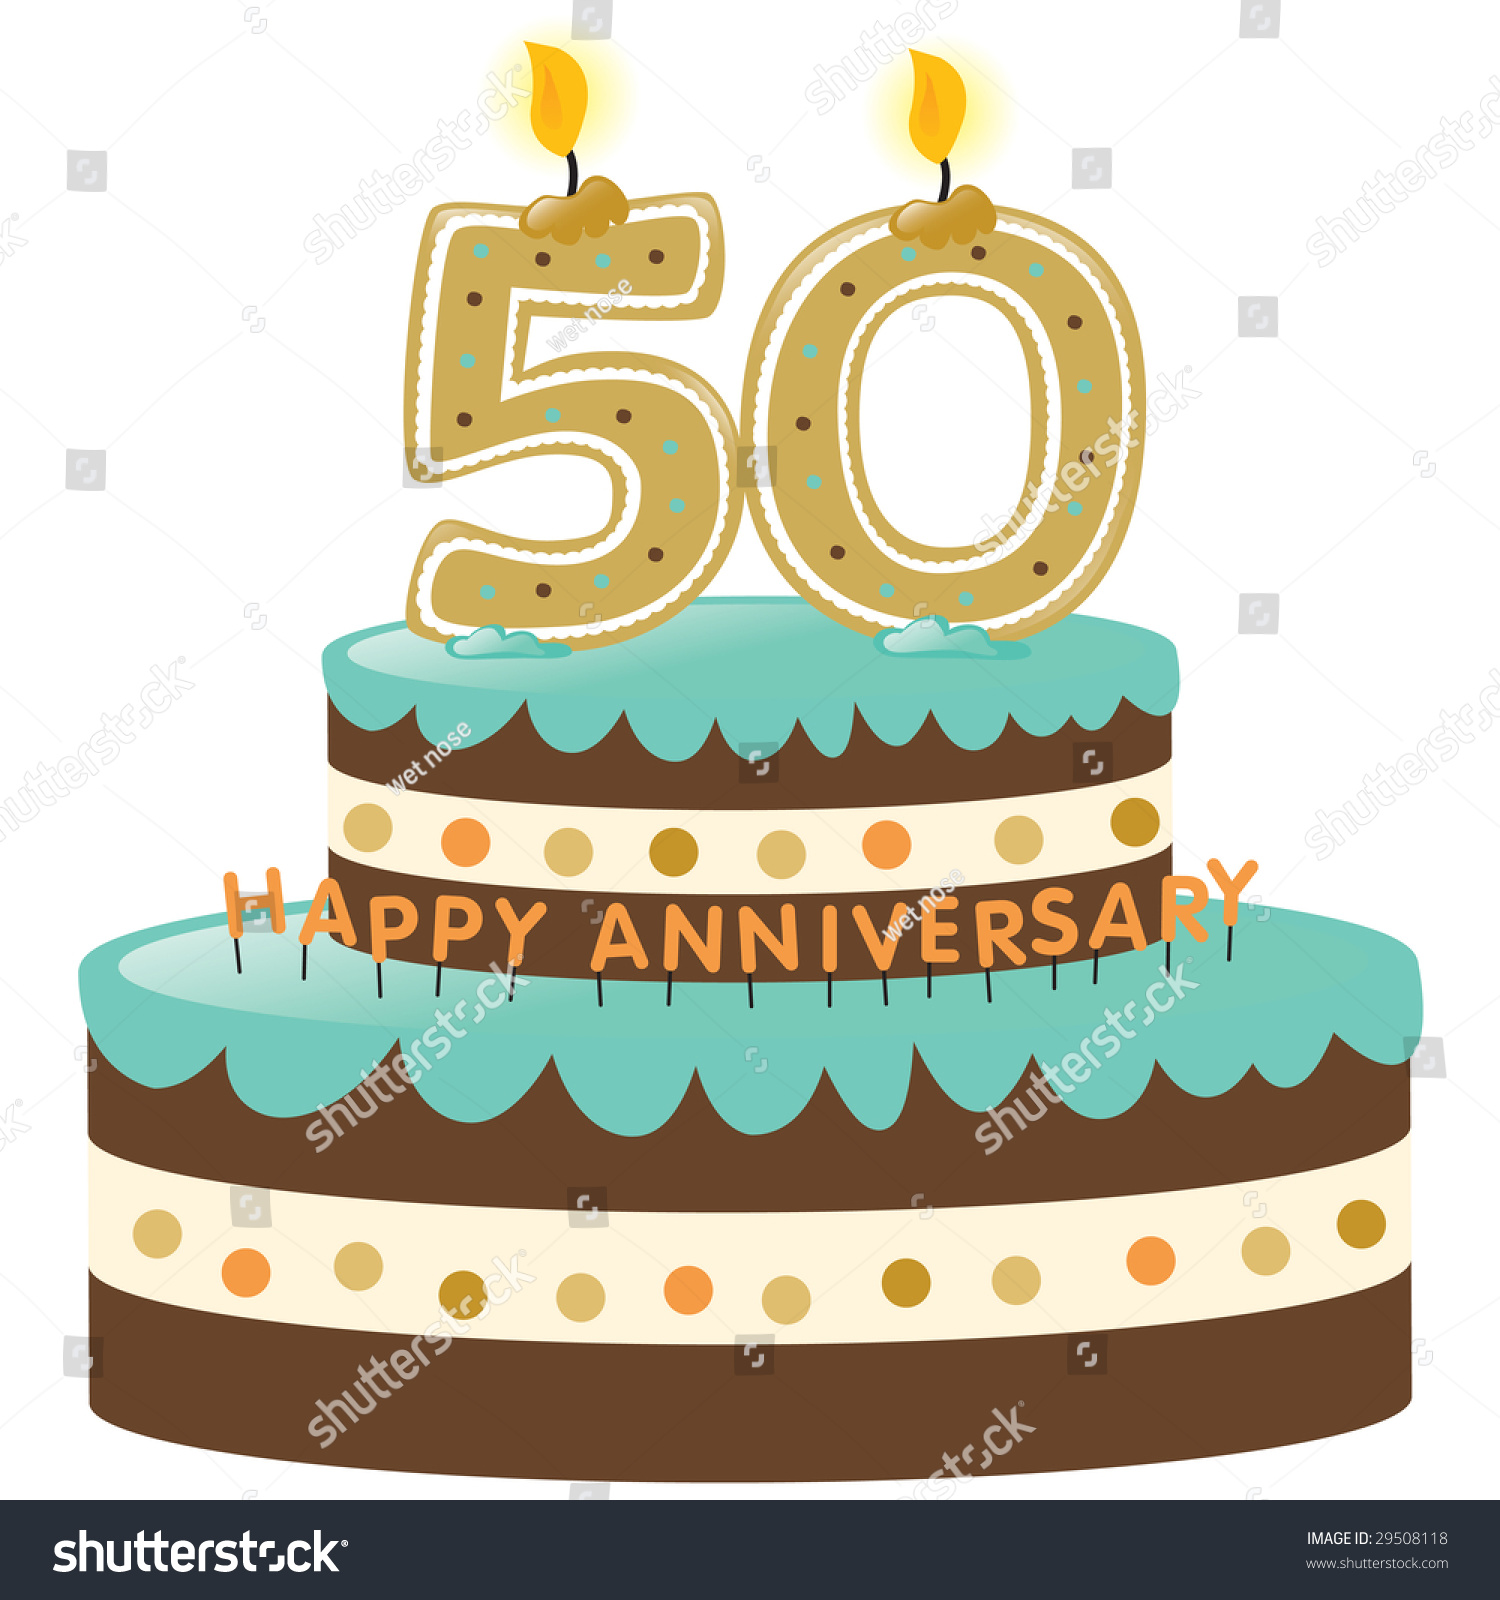 50th Anniversary Cake With Candles Isolated On White Stock Vector ...